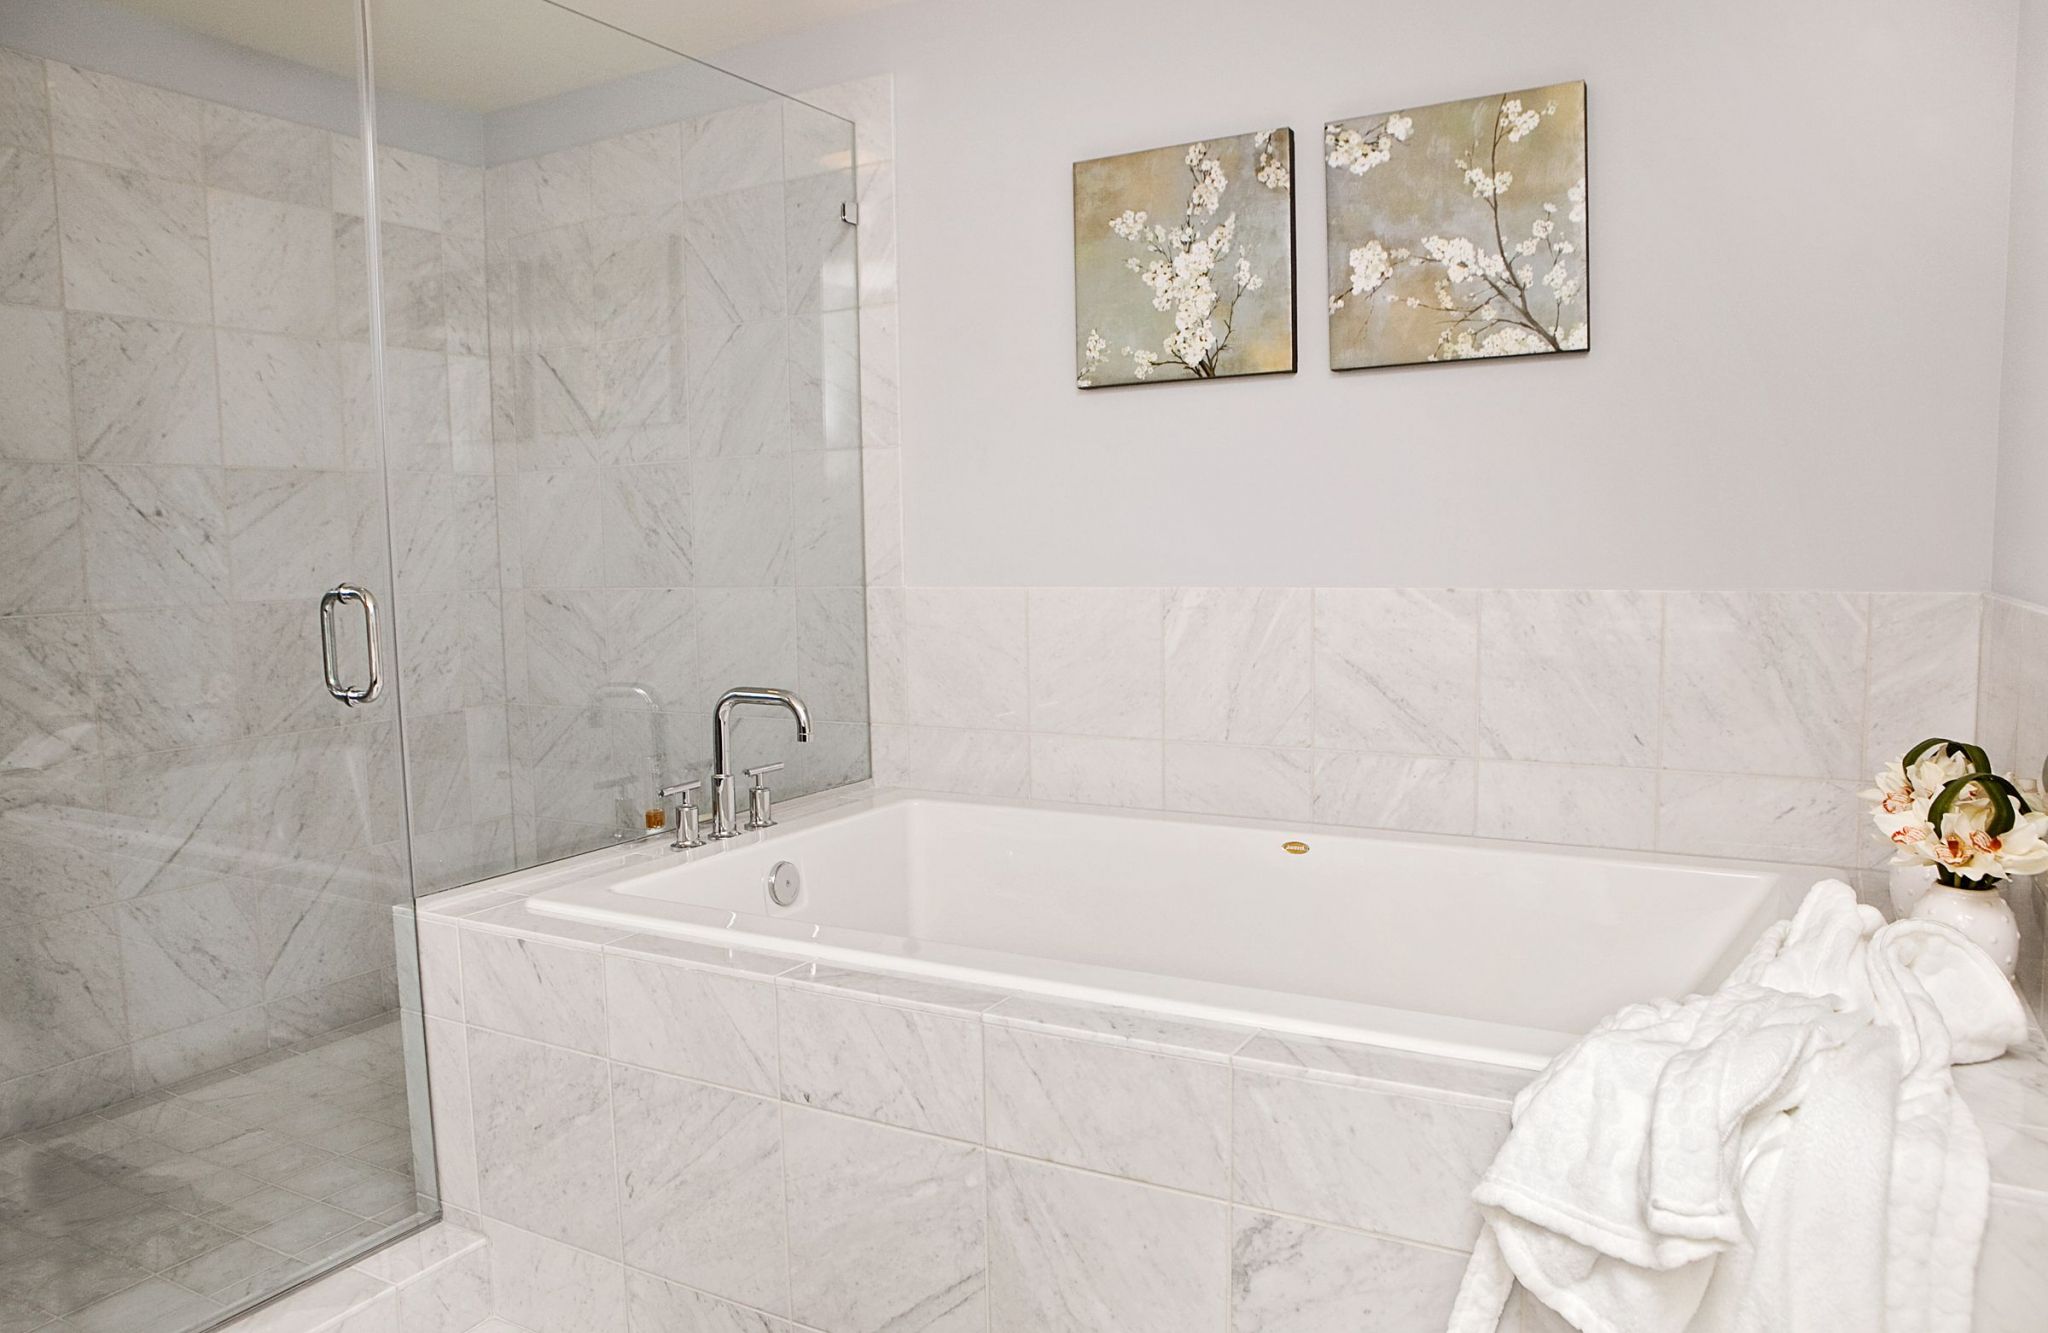 The Vue at Charlotte, NC apartments beautiful bathroom with glass-enclosed unframed shower, large bathtub, and premium light tile